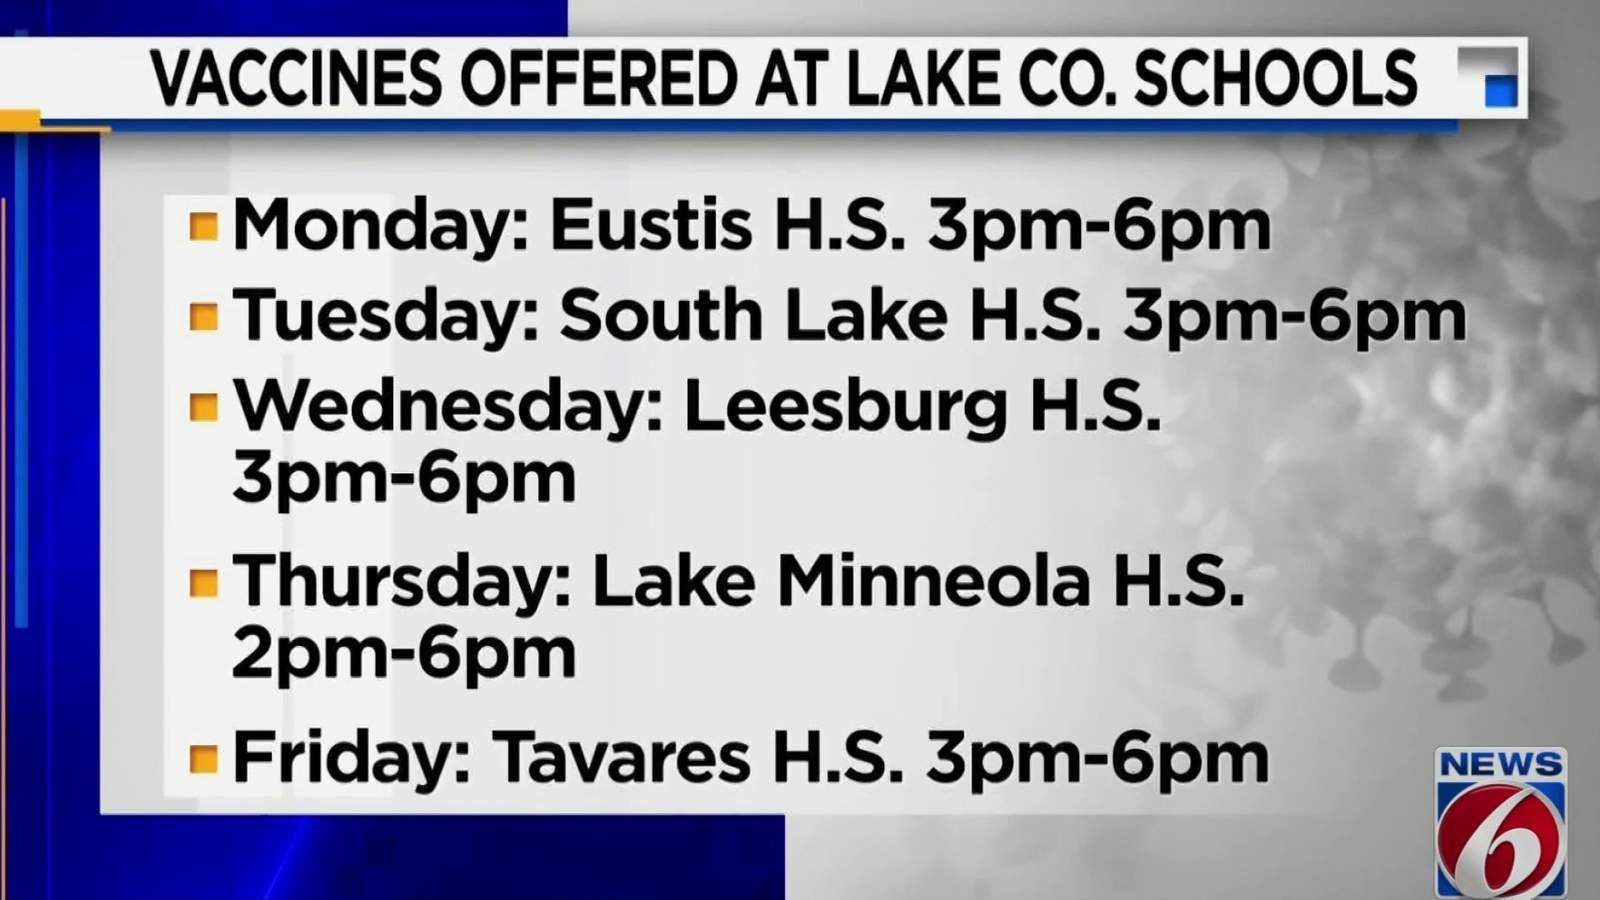 Students 16 and older can soon get vaccinated at Lake County schools